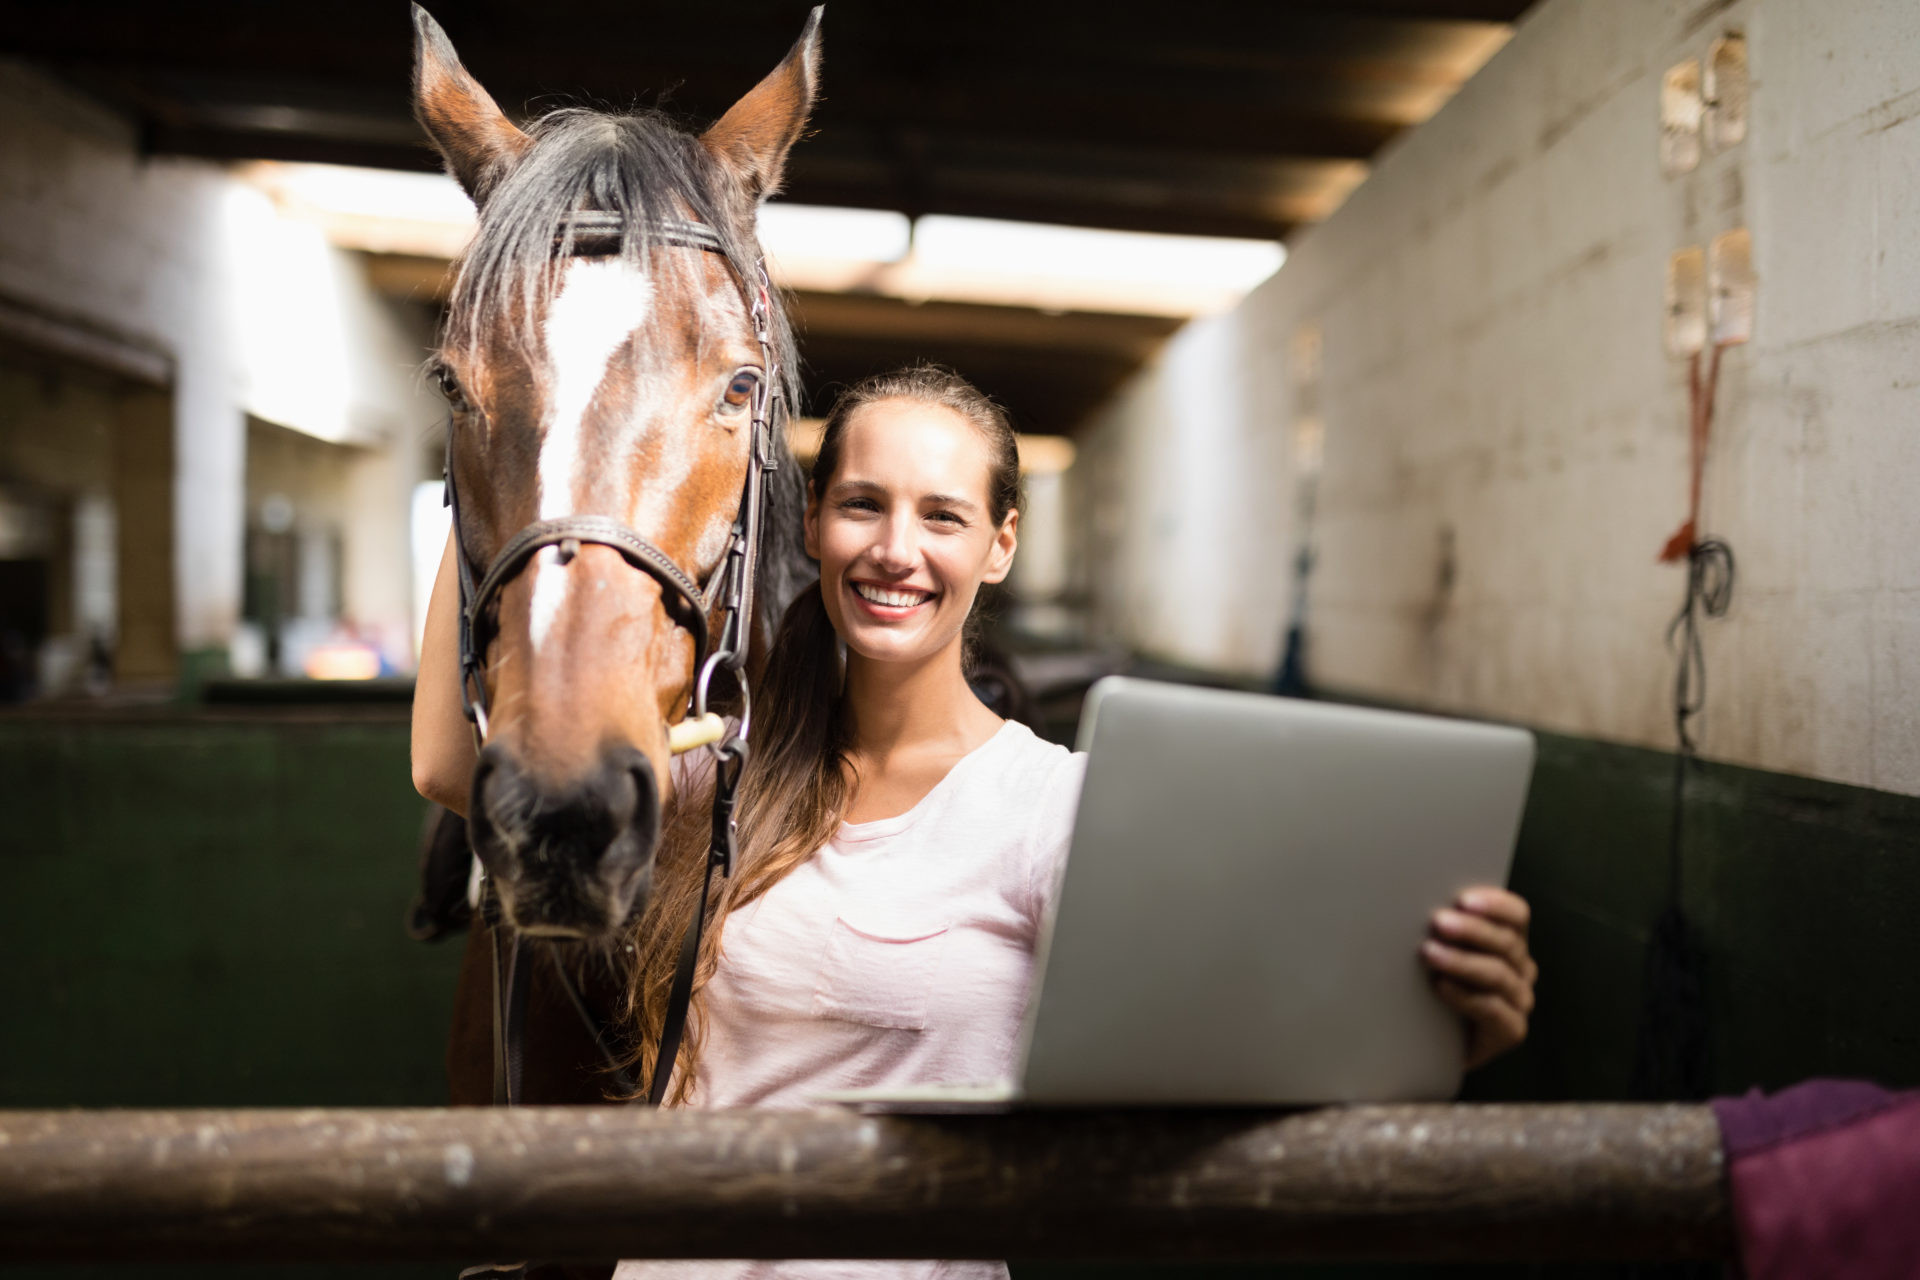 Photograph of a lady with a laptop computer and horse